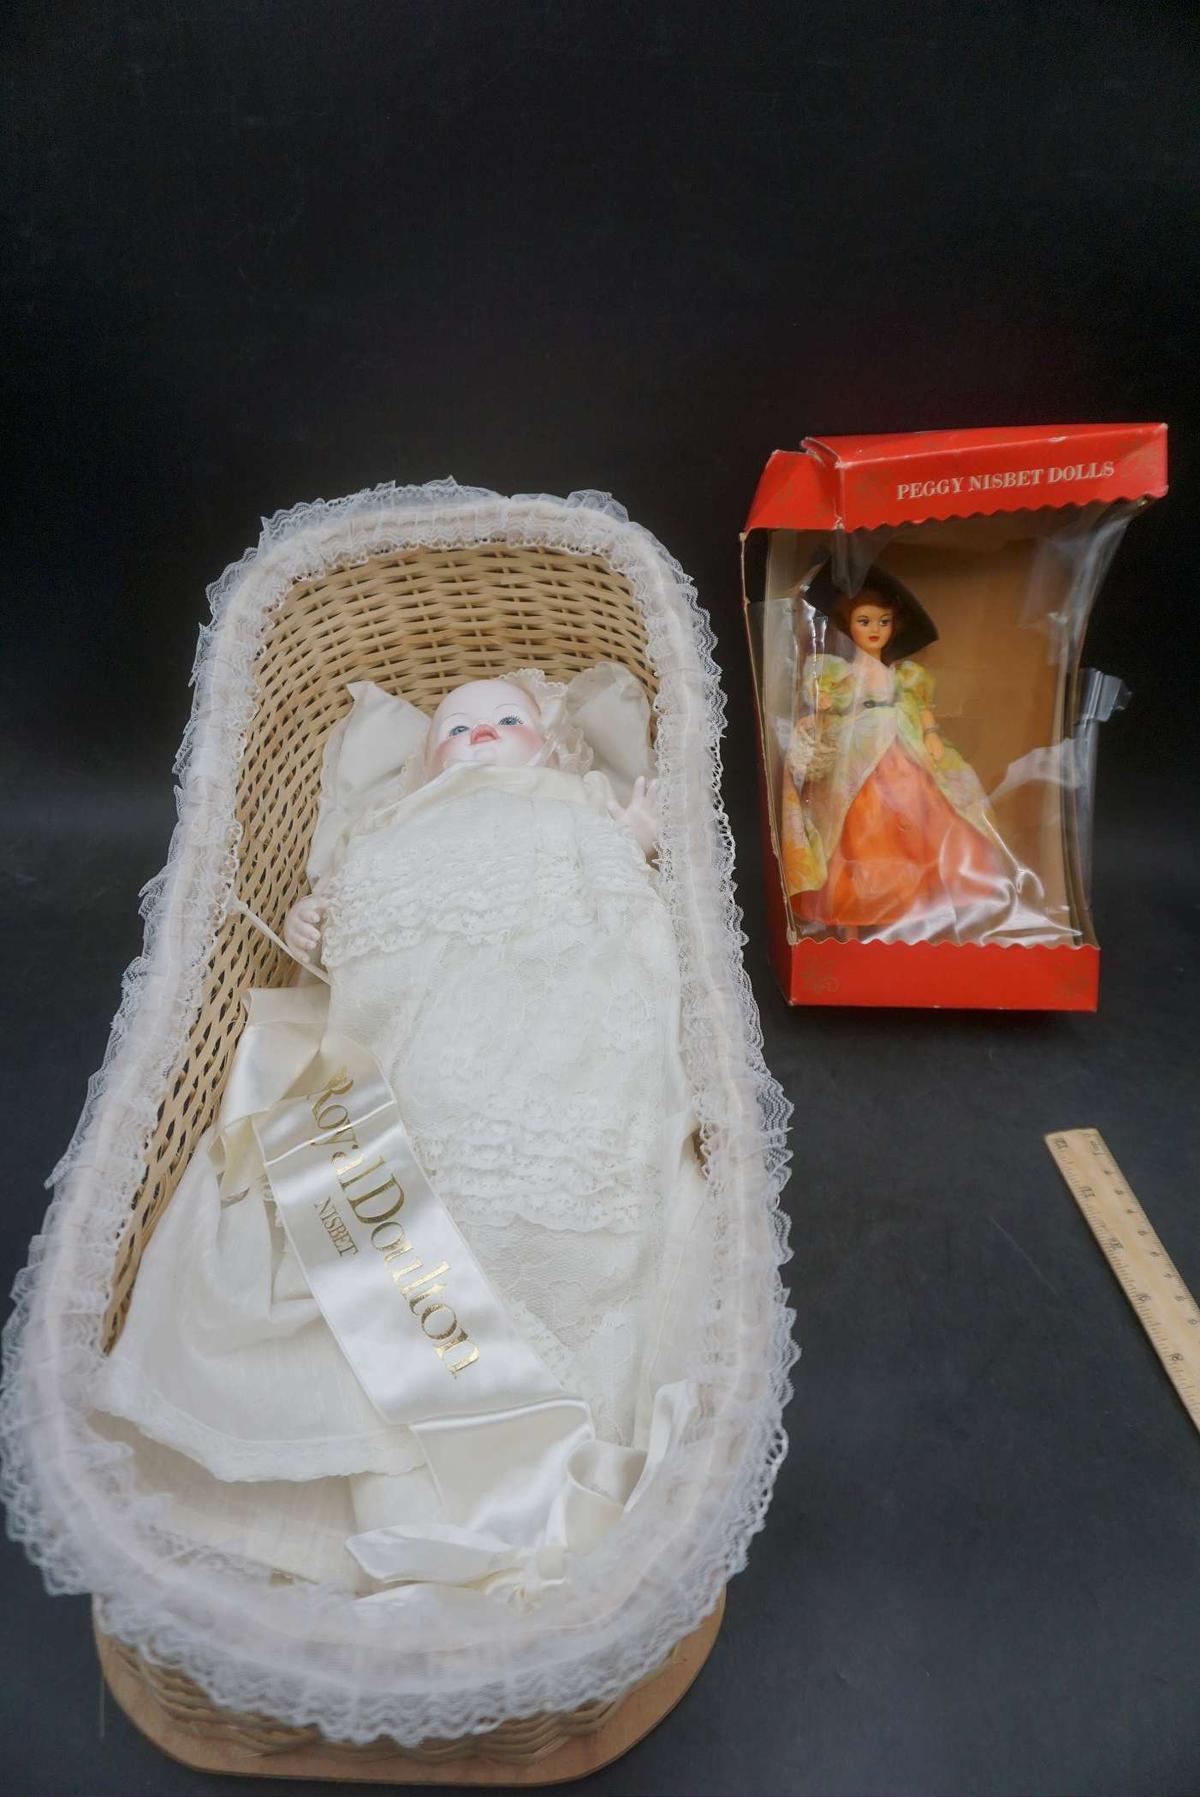 Peggy Nisbet Doll & Royal Doulton Nisbet Doll & Bed